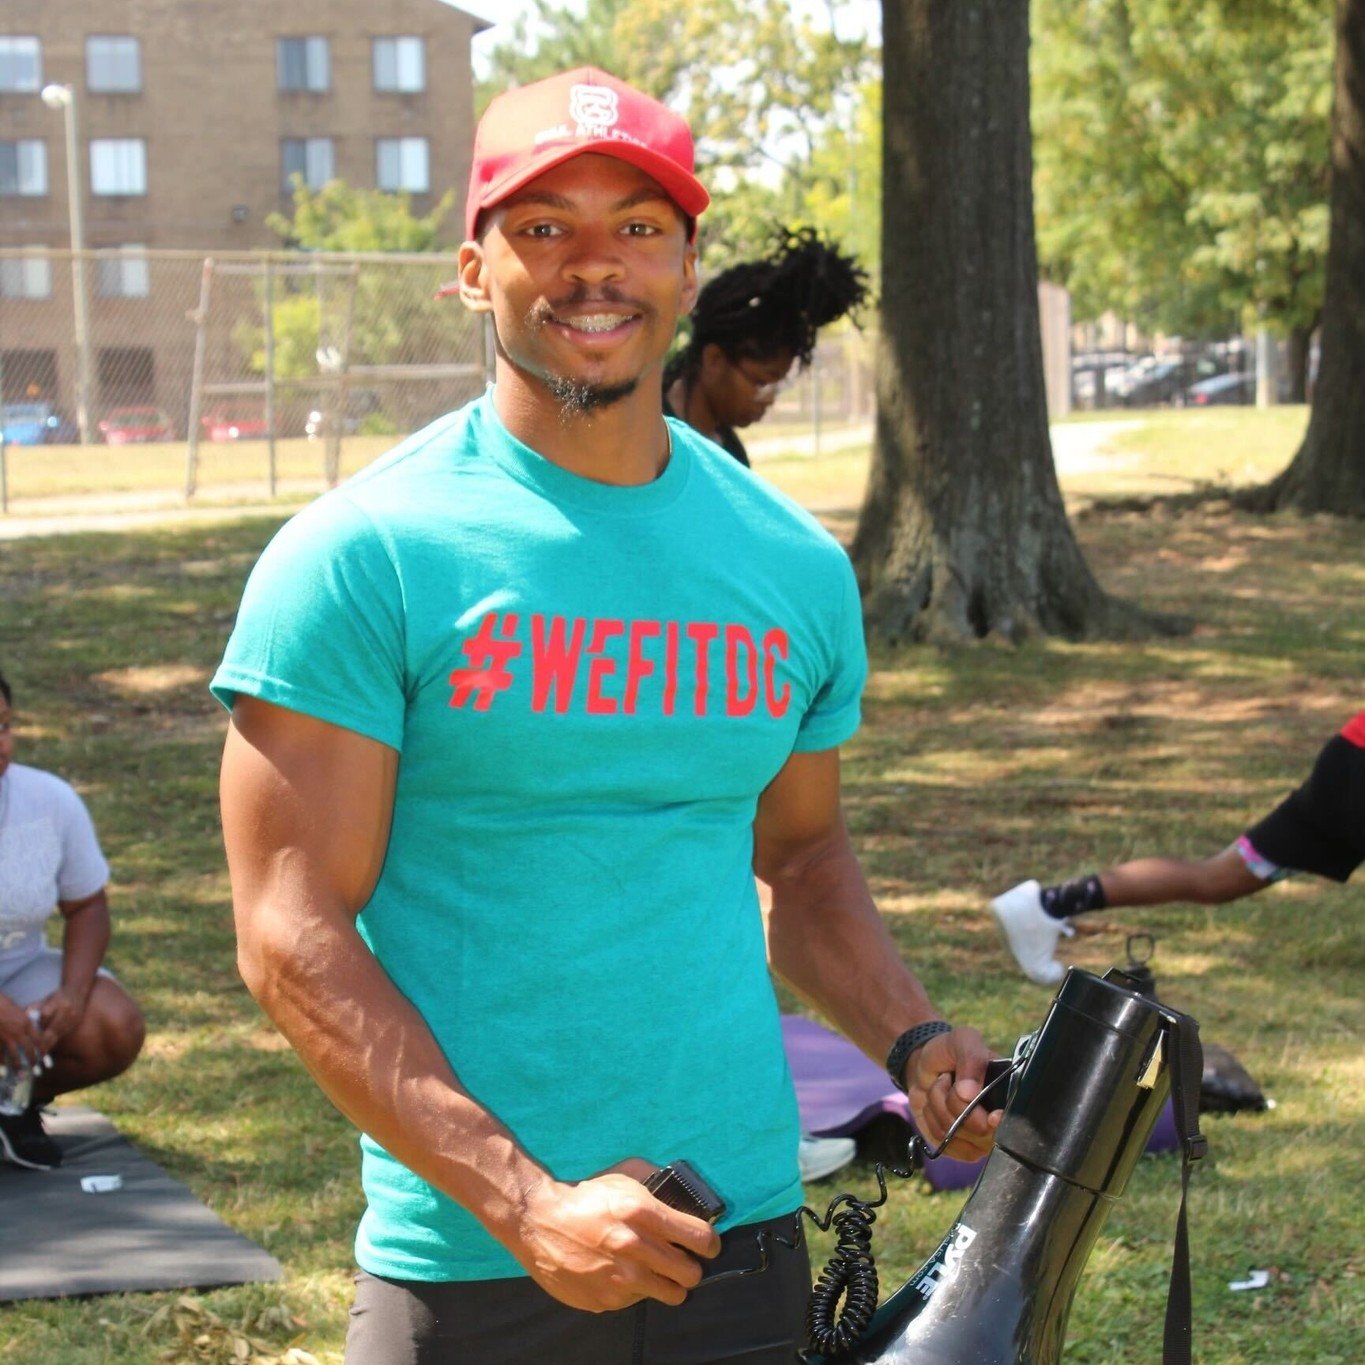 At LINK, #nationalfitnessday is especially meaningful. Not just because we&rsquo;re committed to health and wellness, but because #TeamLINK member Joe Houston Jr. is a local (and soon to be much more) fitness legend! If you didn&rsquo;t know, Joe als